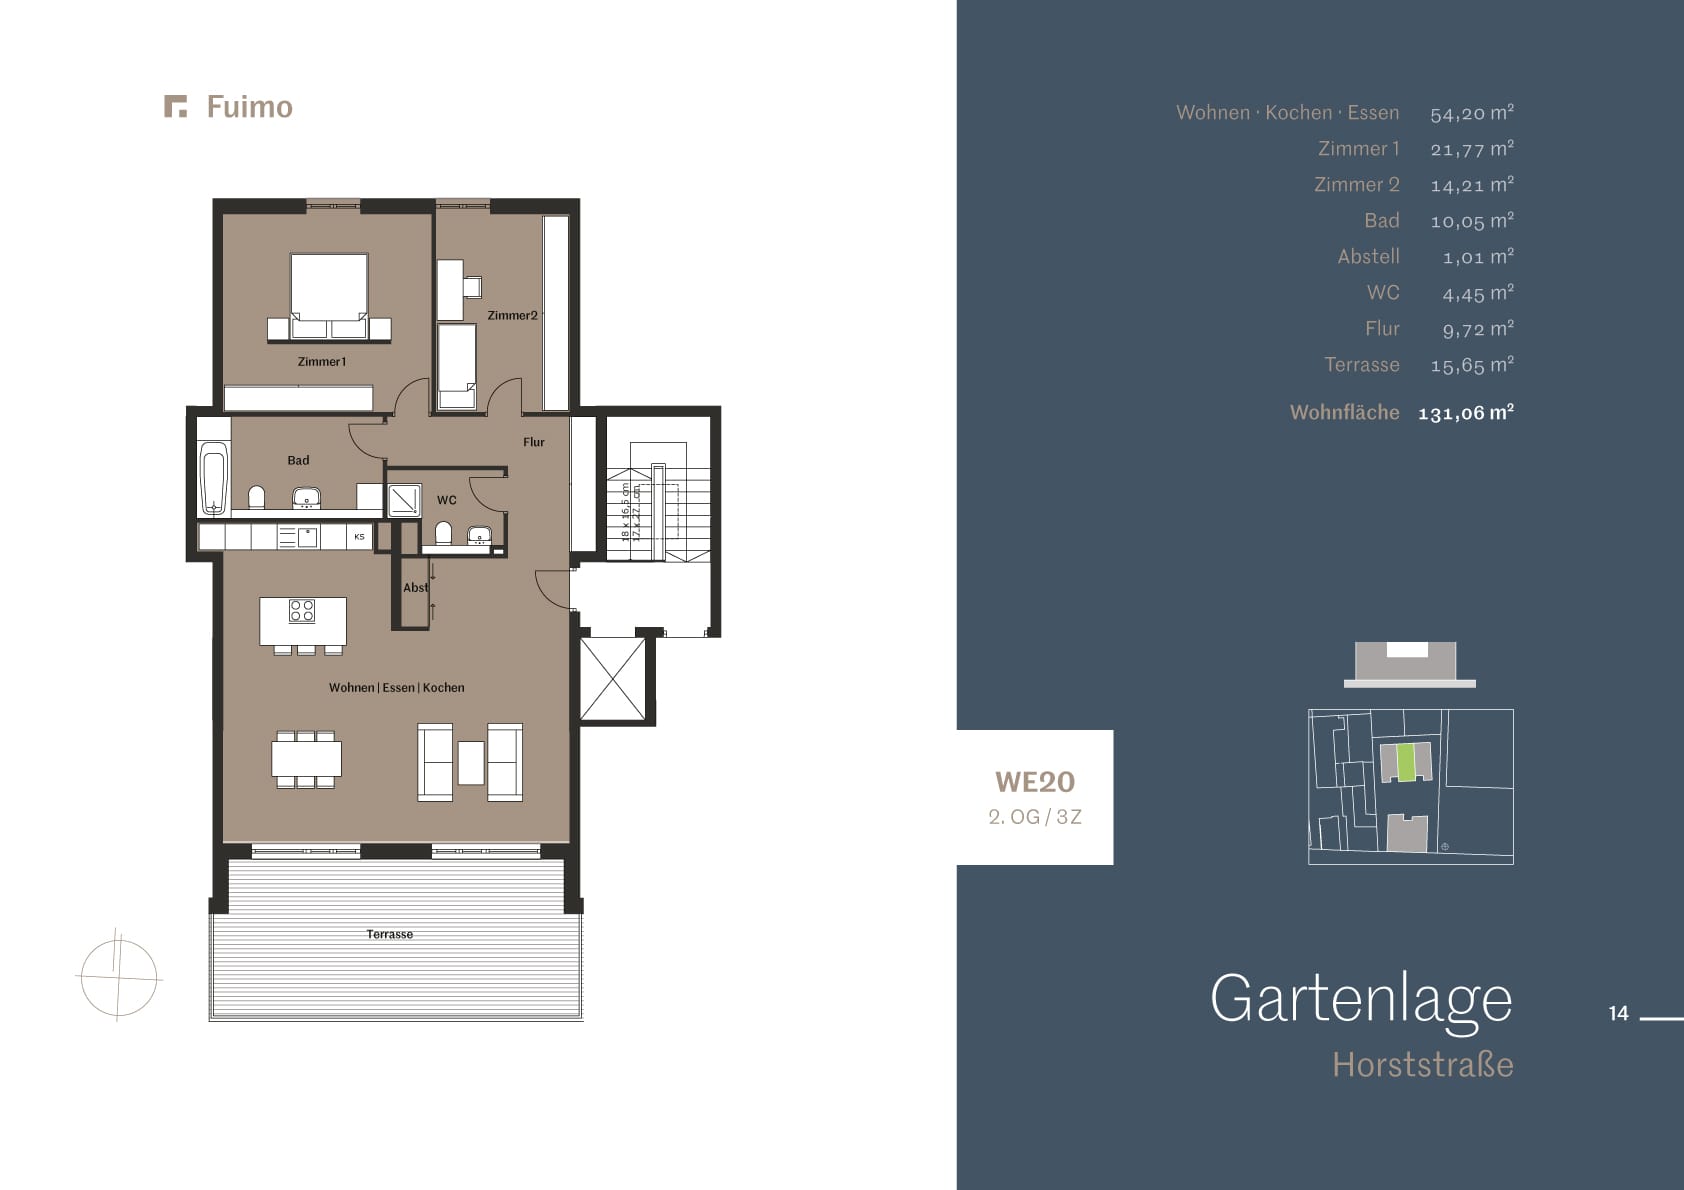 Screenshot of a floor plan, embedded into a brochure layout